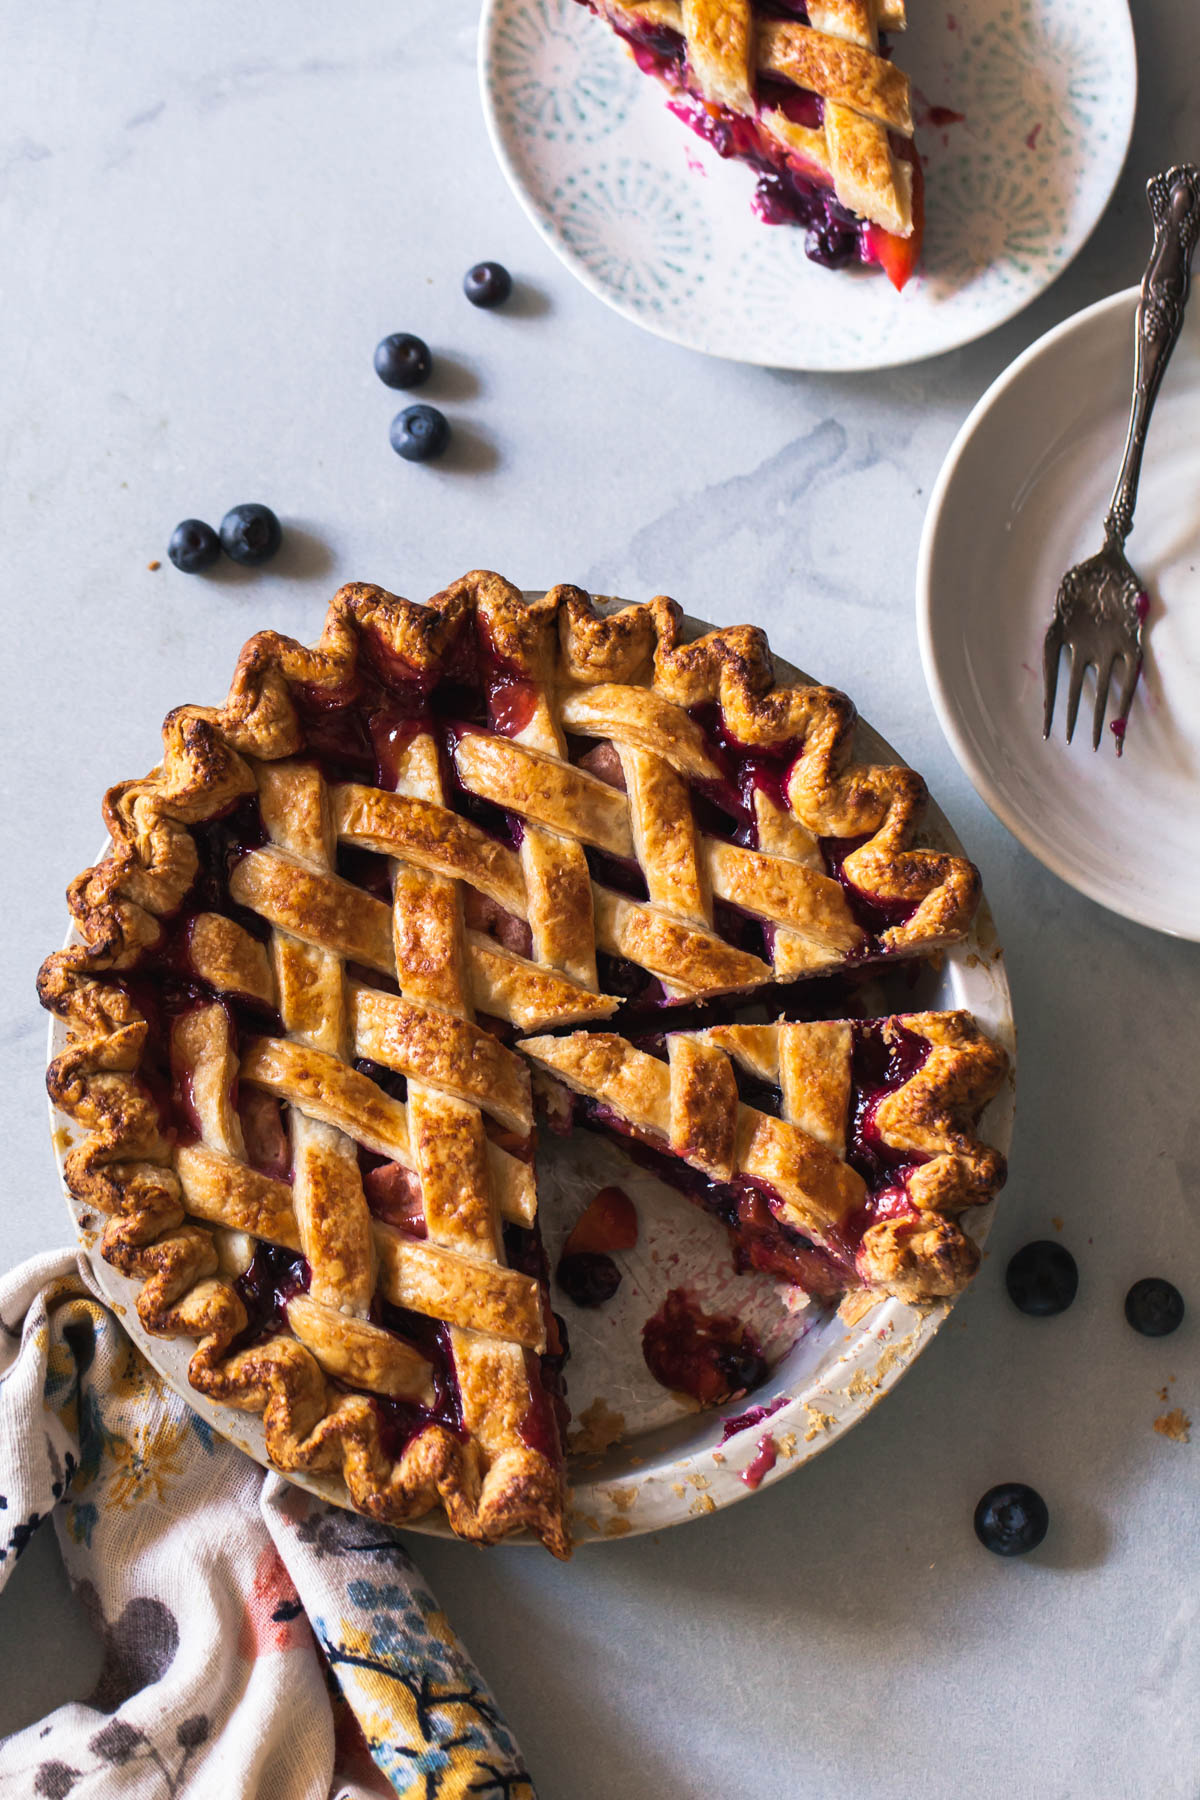 A baked and sliced blueberry peach pie